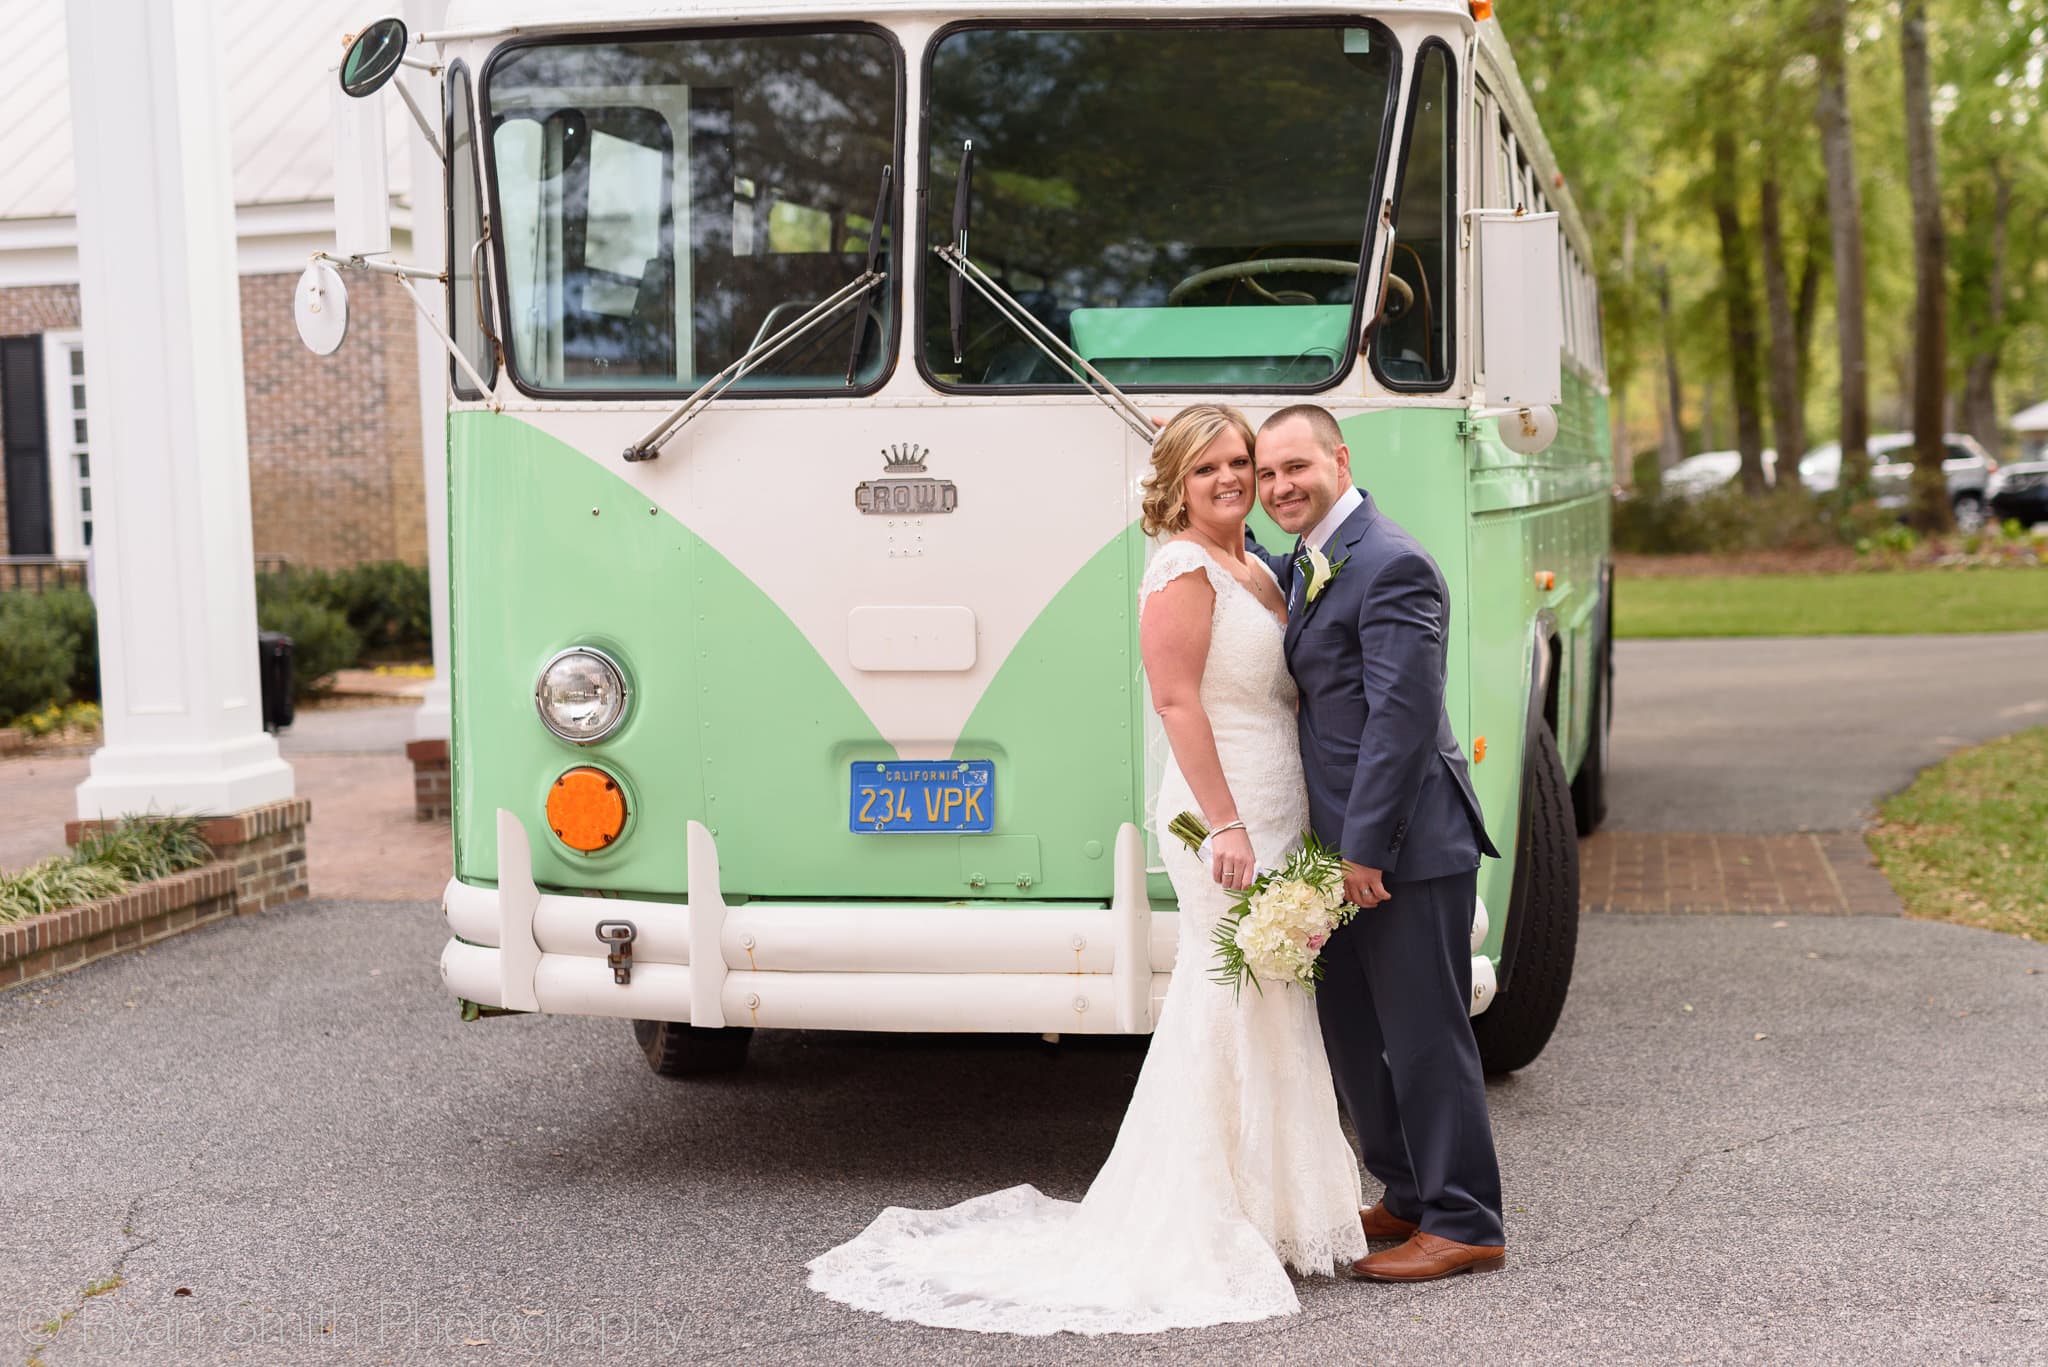 Bride and groom in front of the bus - Pawleys Plantation